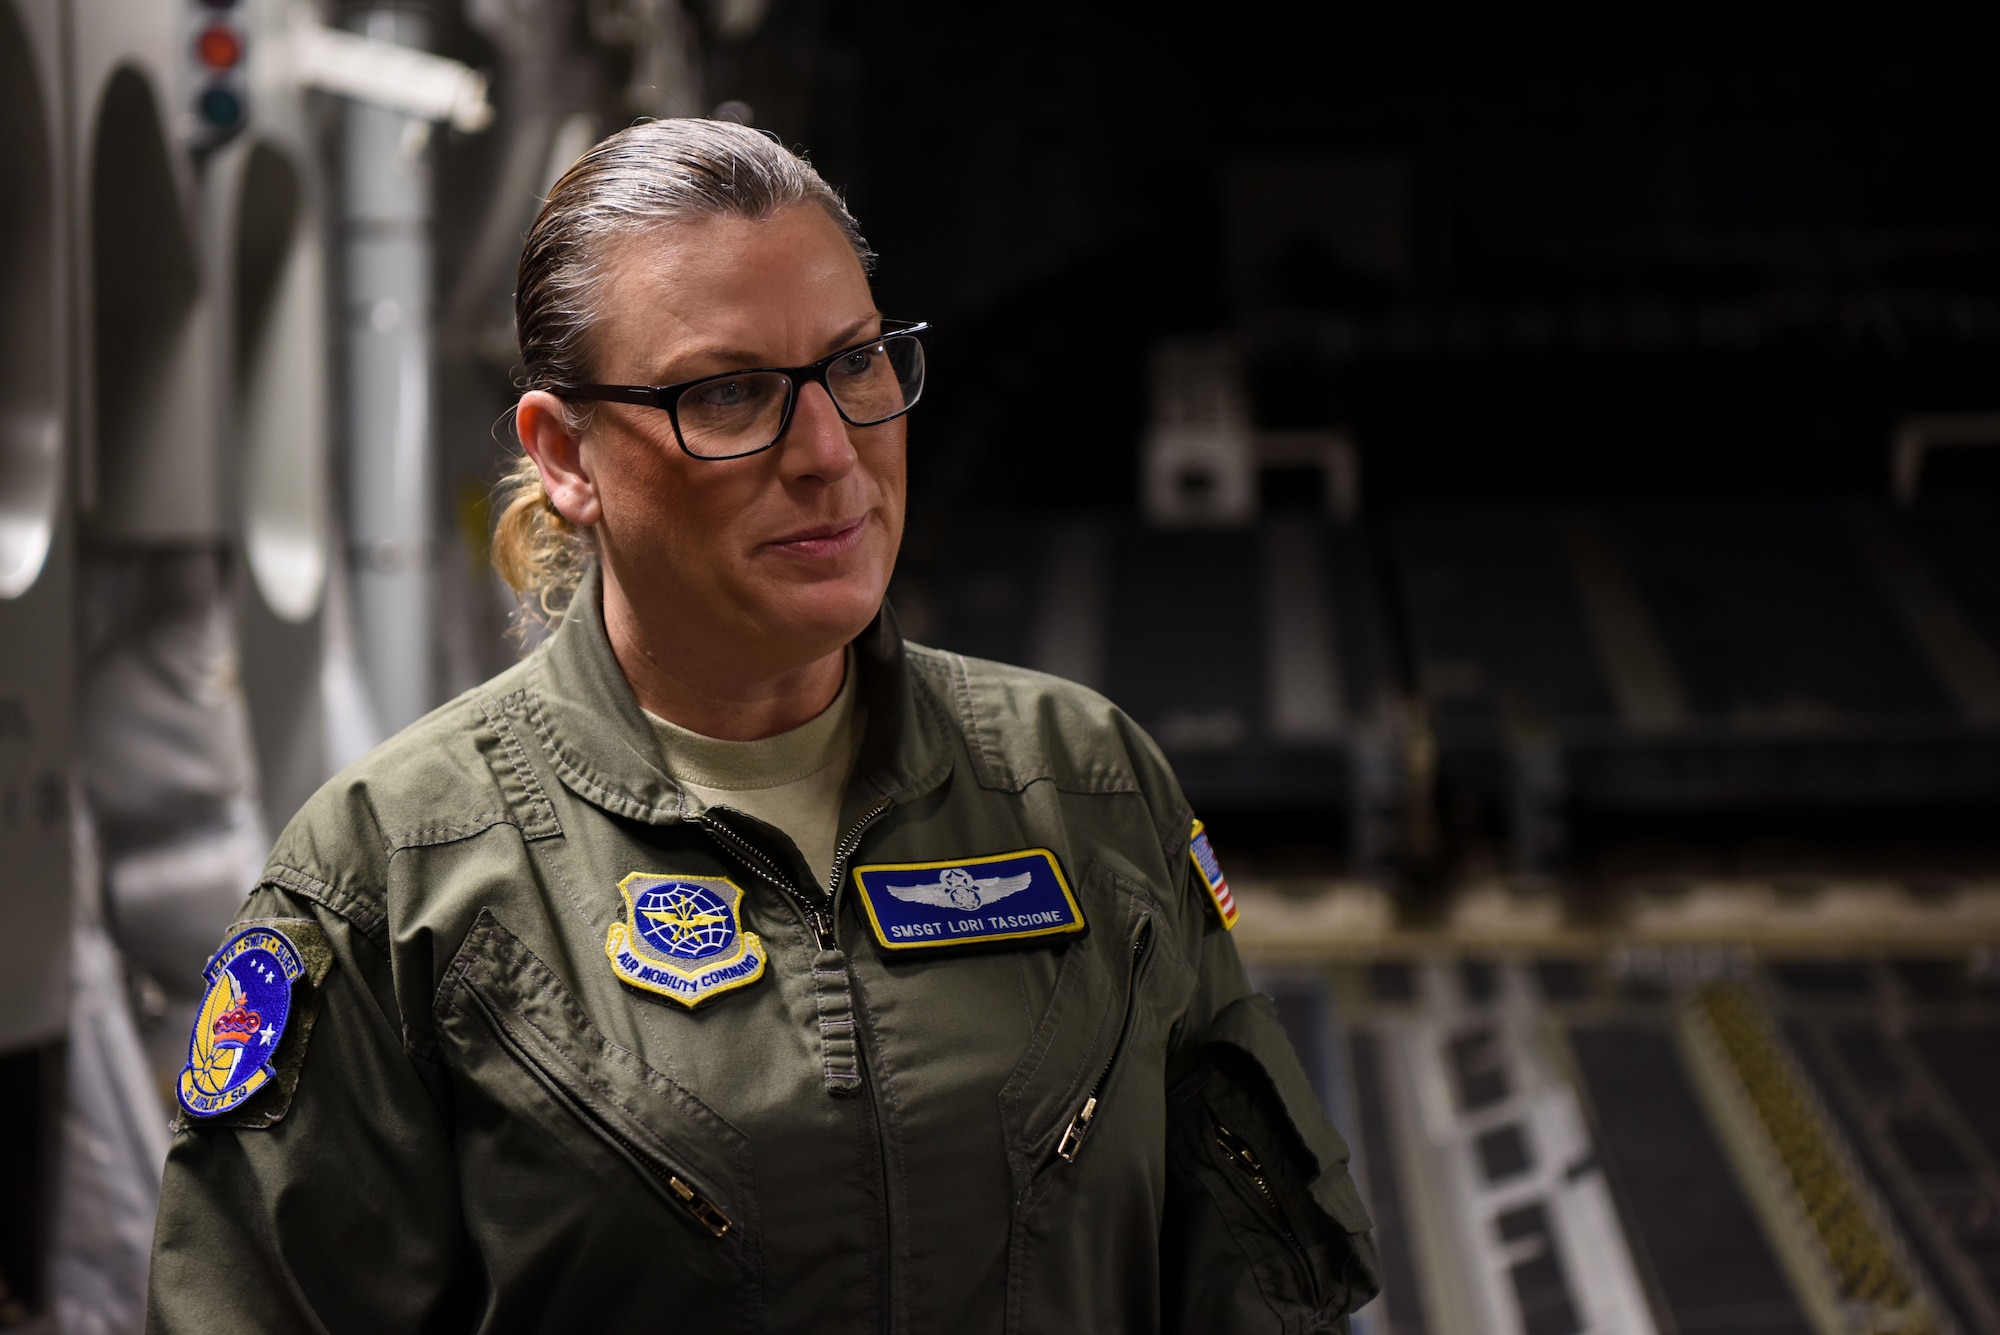 Senior Master Sgt. Lori Tascione, 3rd Airlift Squadron superintendent, prepares for a flight March 5, 2018, at Dover Air Force Base, Del. Tascione flew as the loadmaster for the mission that was her final flight before her retirement. (U.S. Air Force Photo by Airman 1st Class Zoe M. Wockenfuss)